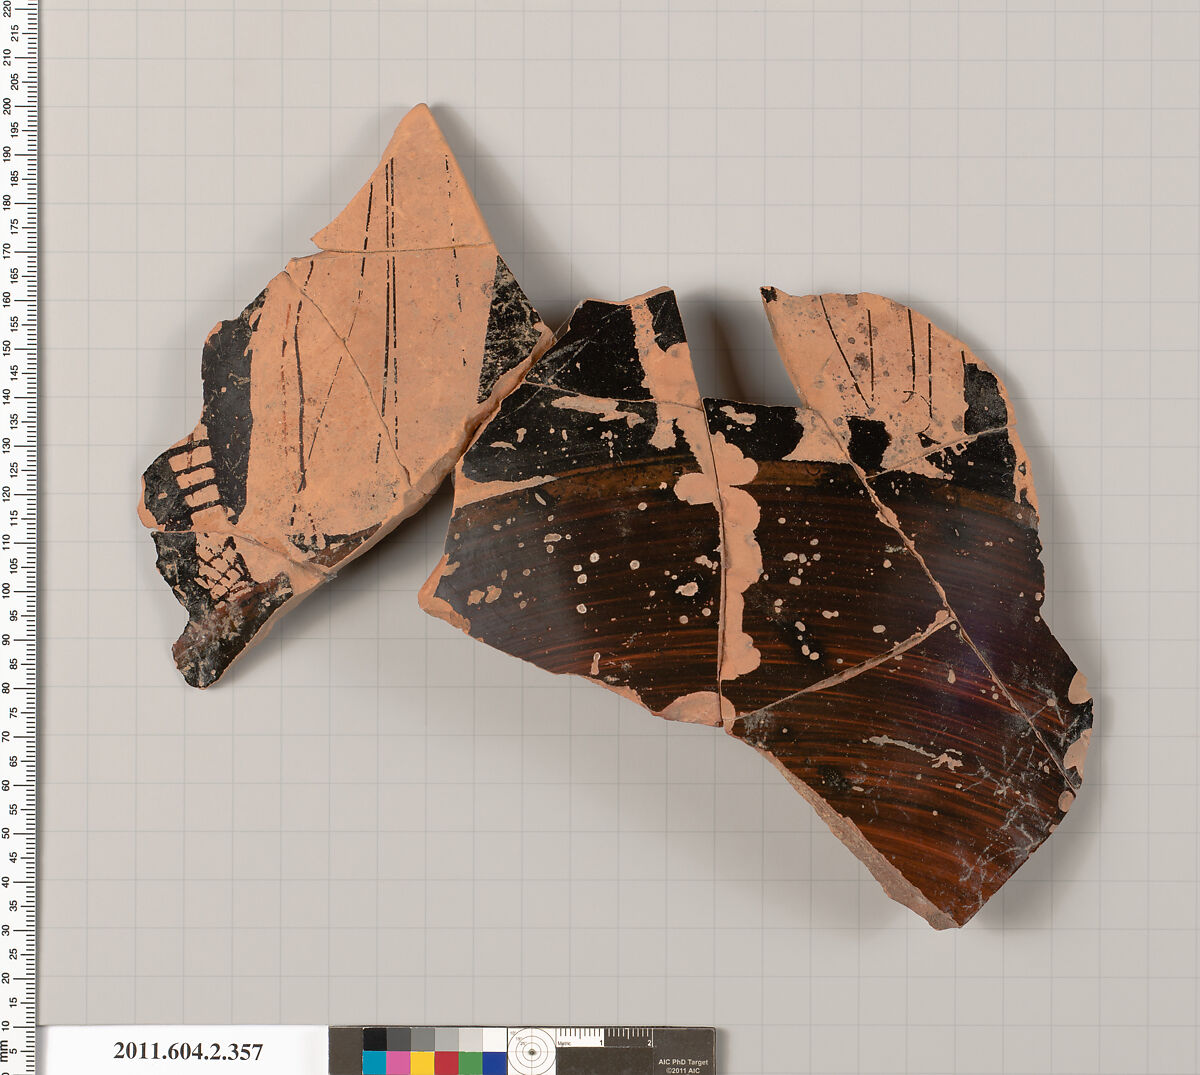 Terracotta fragment of a column-krater (bowl for mixing wine and water), Terracotta, Greek, Attic 